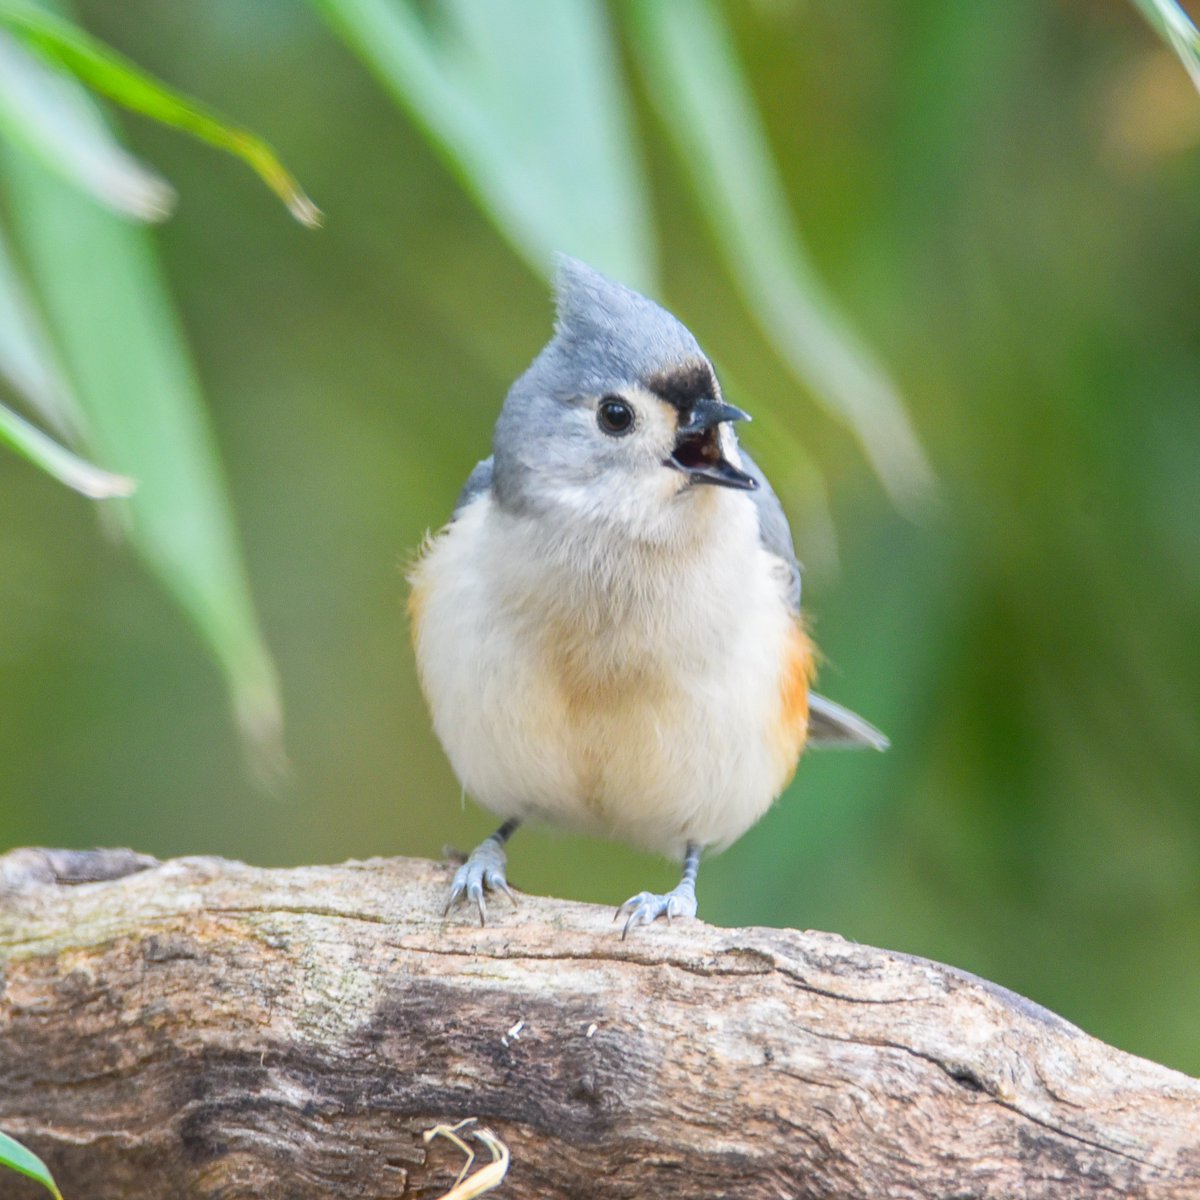 A Titmouse that has come out of it's shell and is speaking his mind without regard for whom should hear it.

#birdphoto #nature #naturephotography
#naturephoto #wildlife
#wildlifephotography #wildlifephotos
#greensboroboggarden #birdphotography #bird #birding #birdsofinstagram